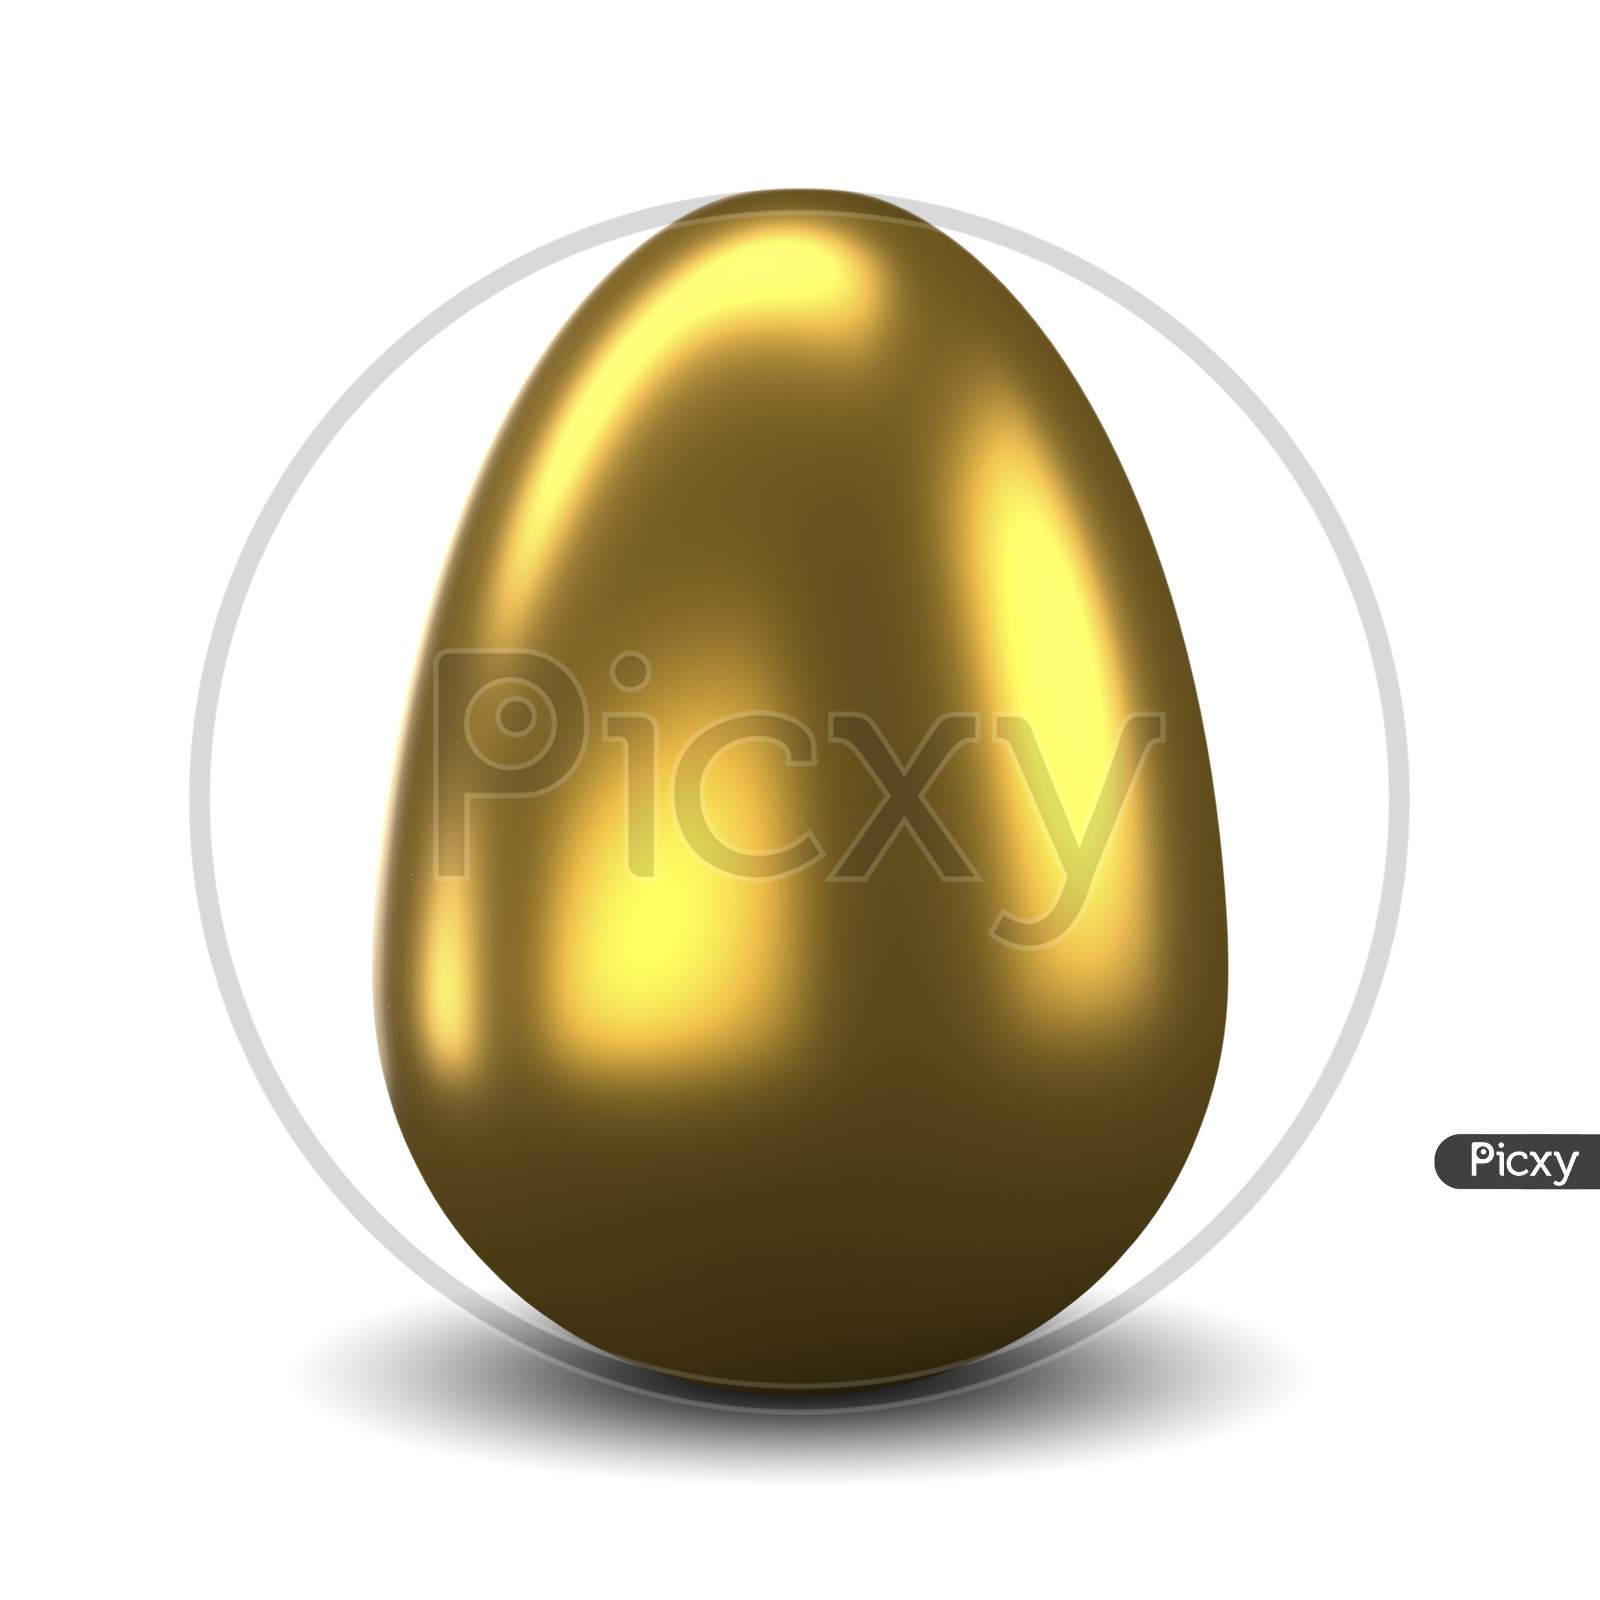 Gold Easter Egg On Isolated White Background. Holiday And Festival Concept. 3D Illustration. Clipping Path Use